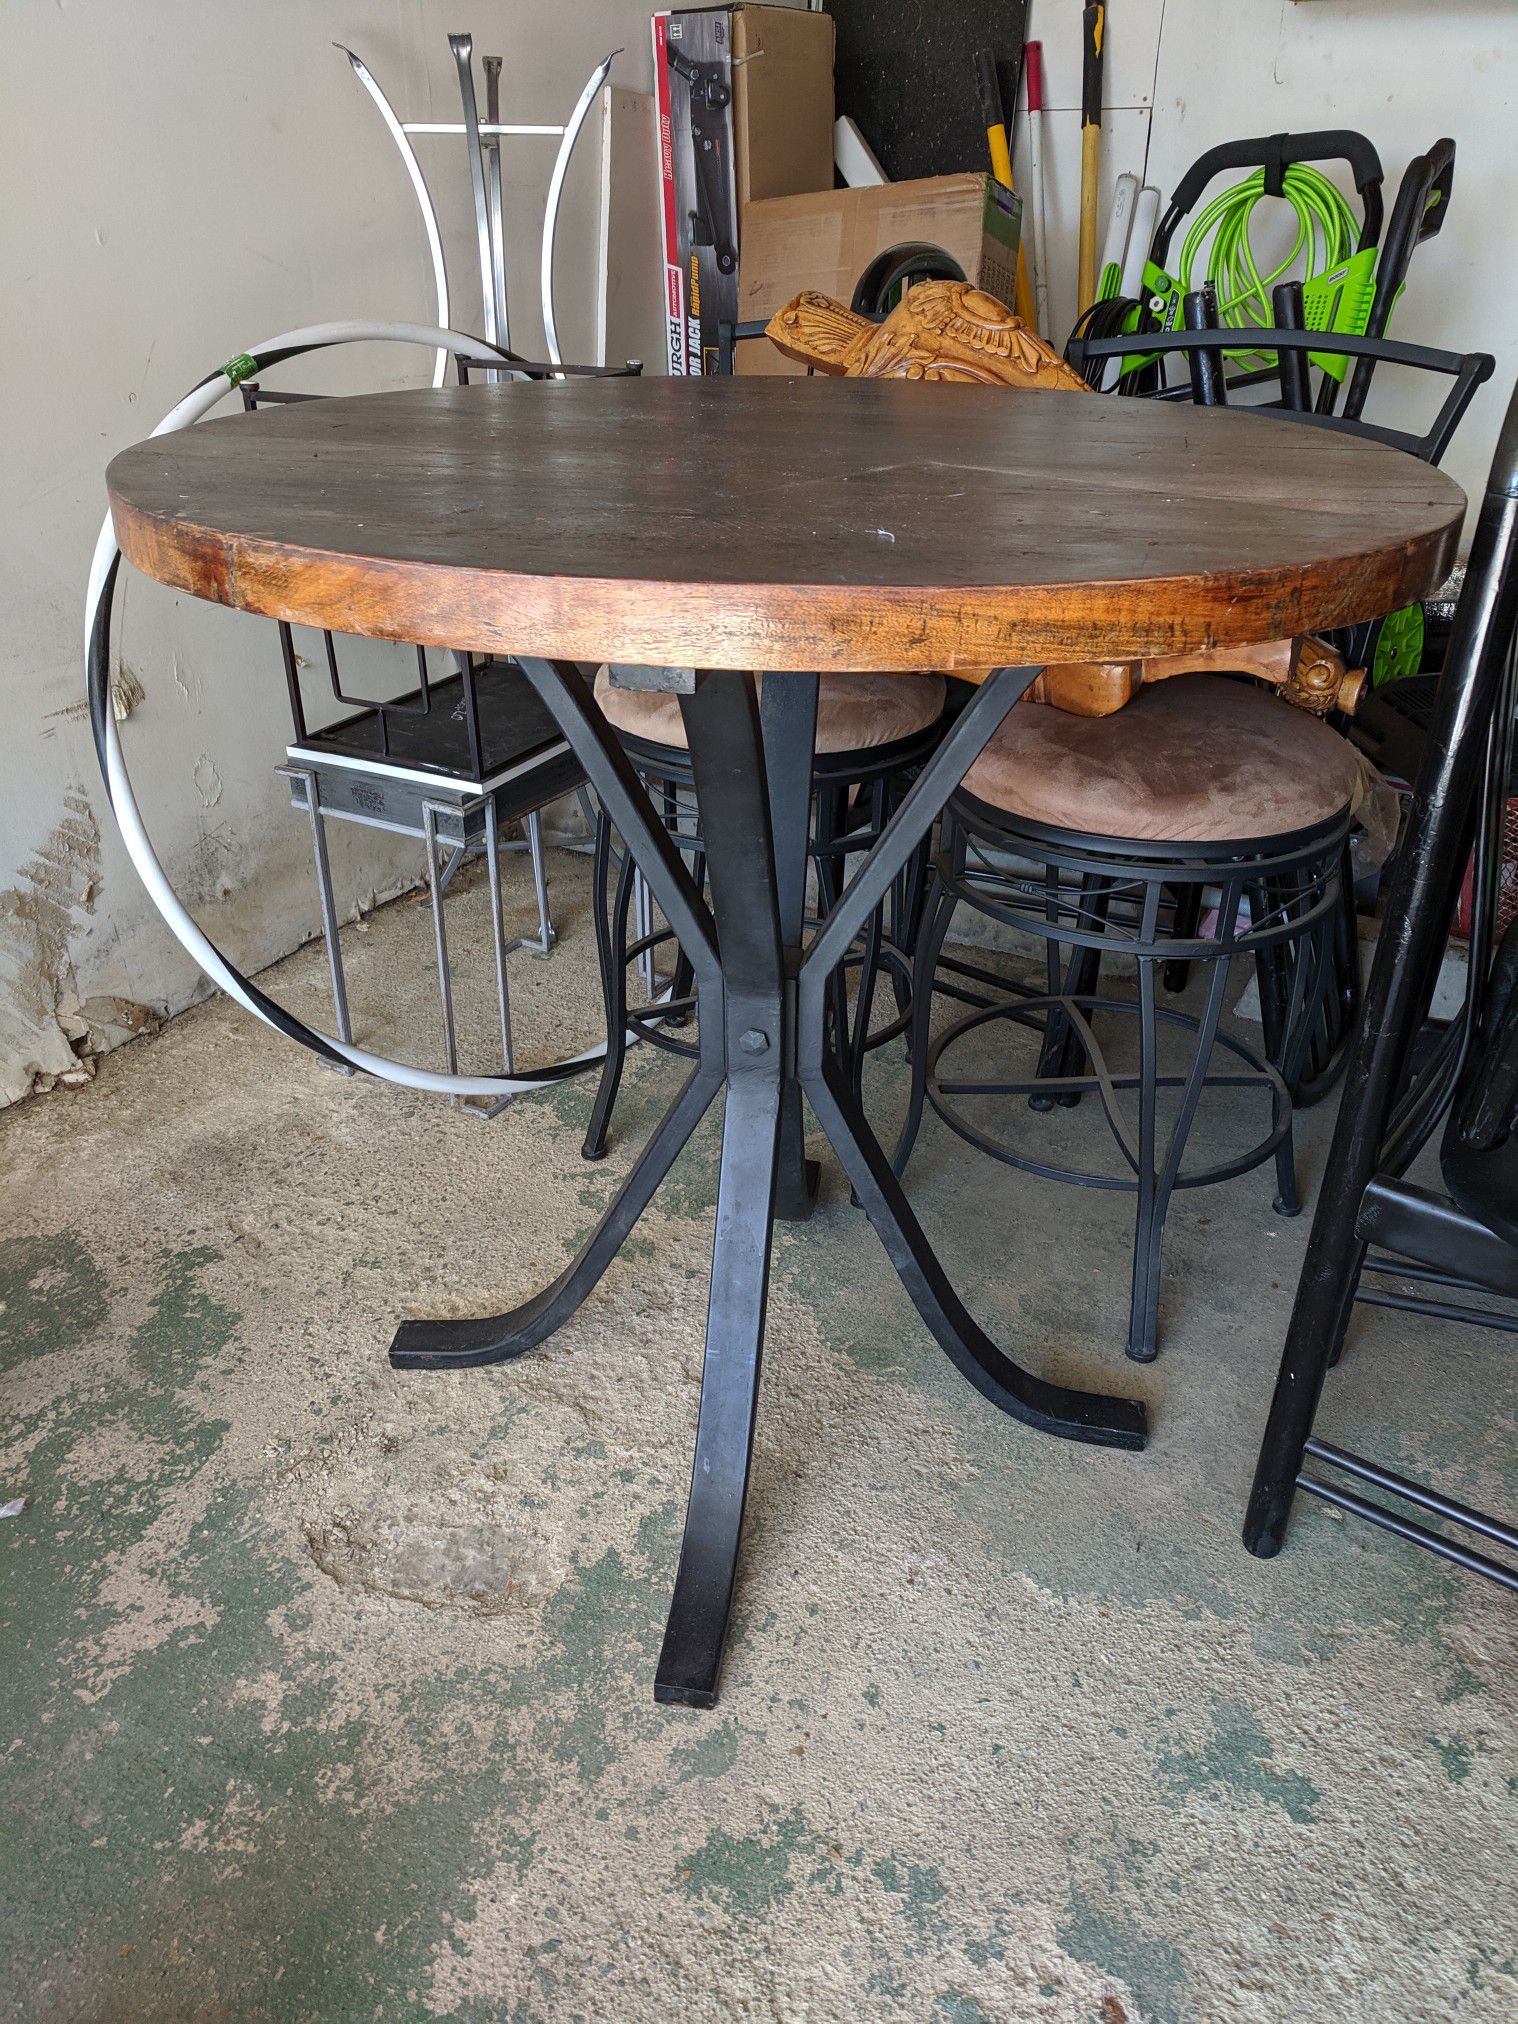 High Wooden Table with Iron Legs + Stools